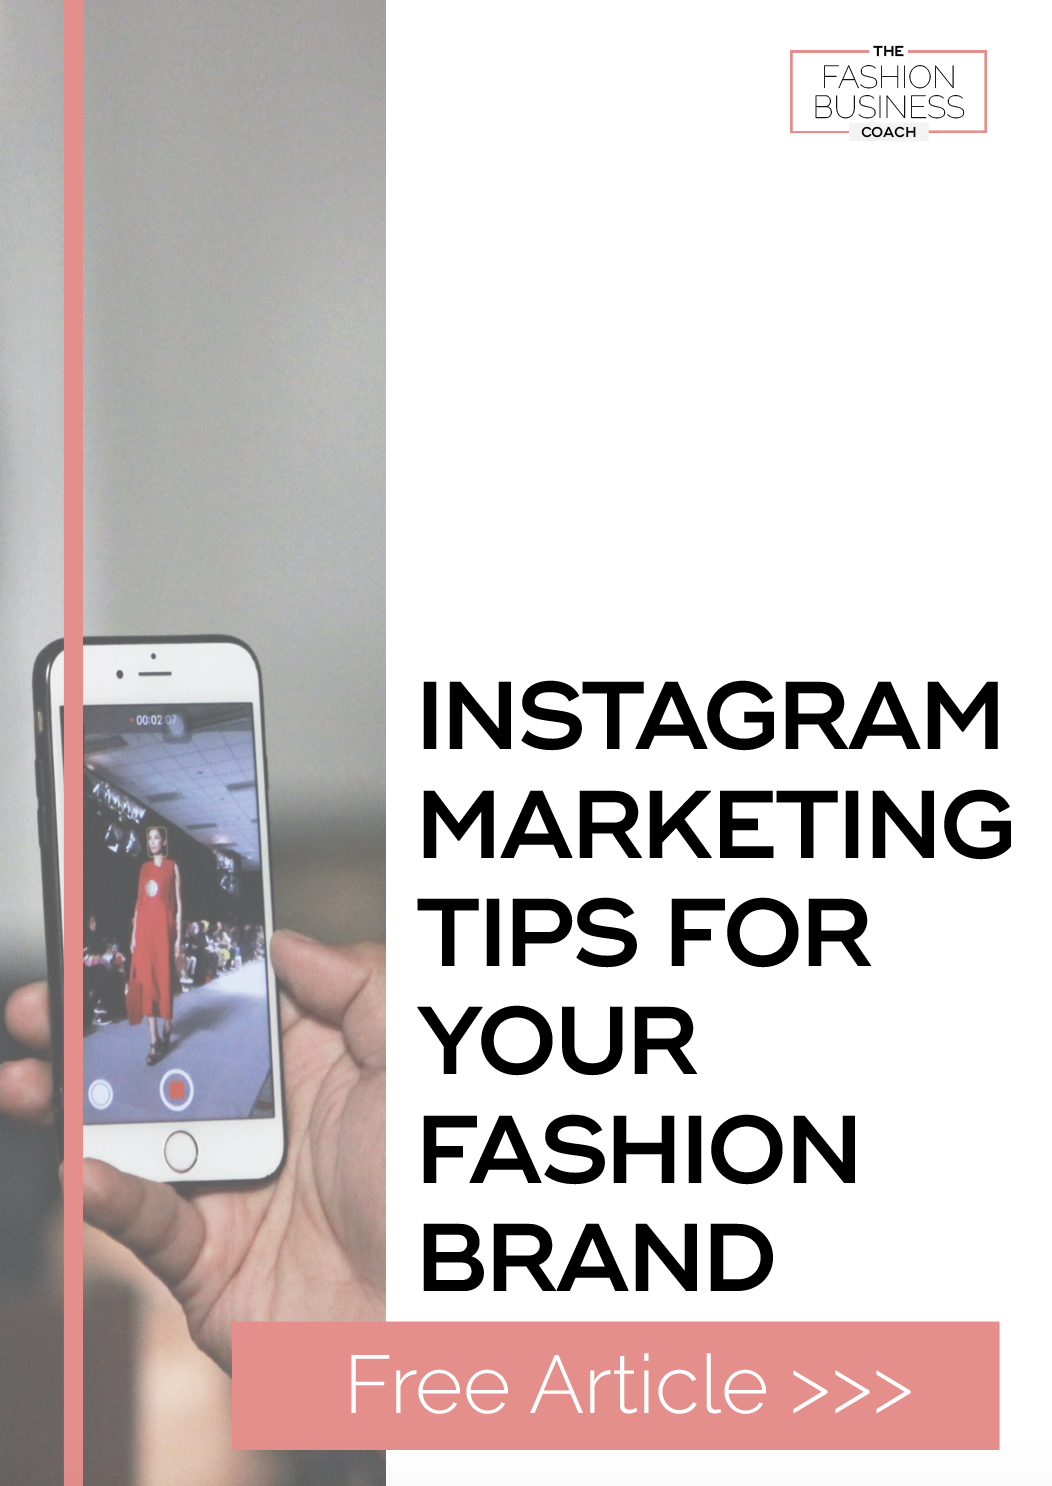 Instagram Marketing Tips for Your Fashion Brand 1.png